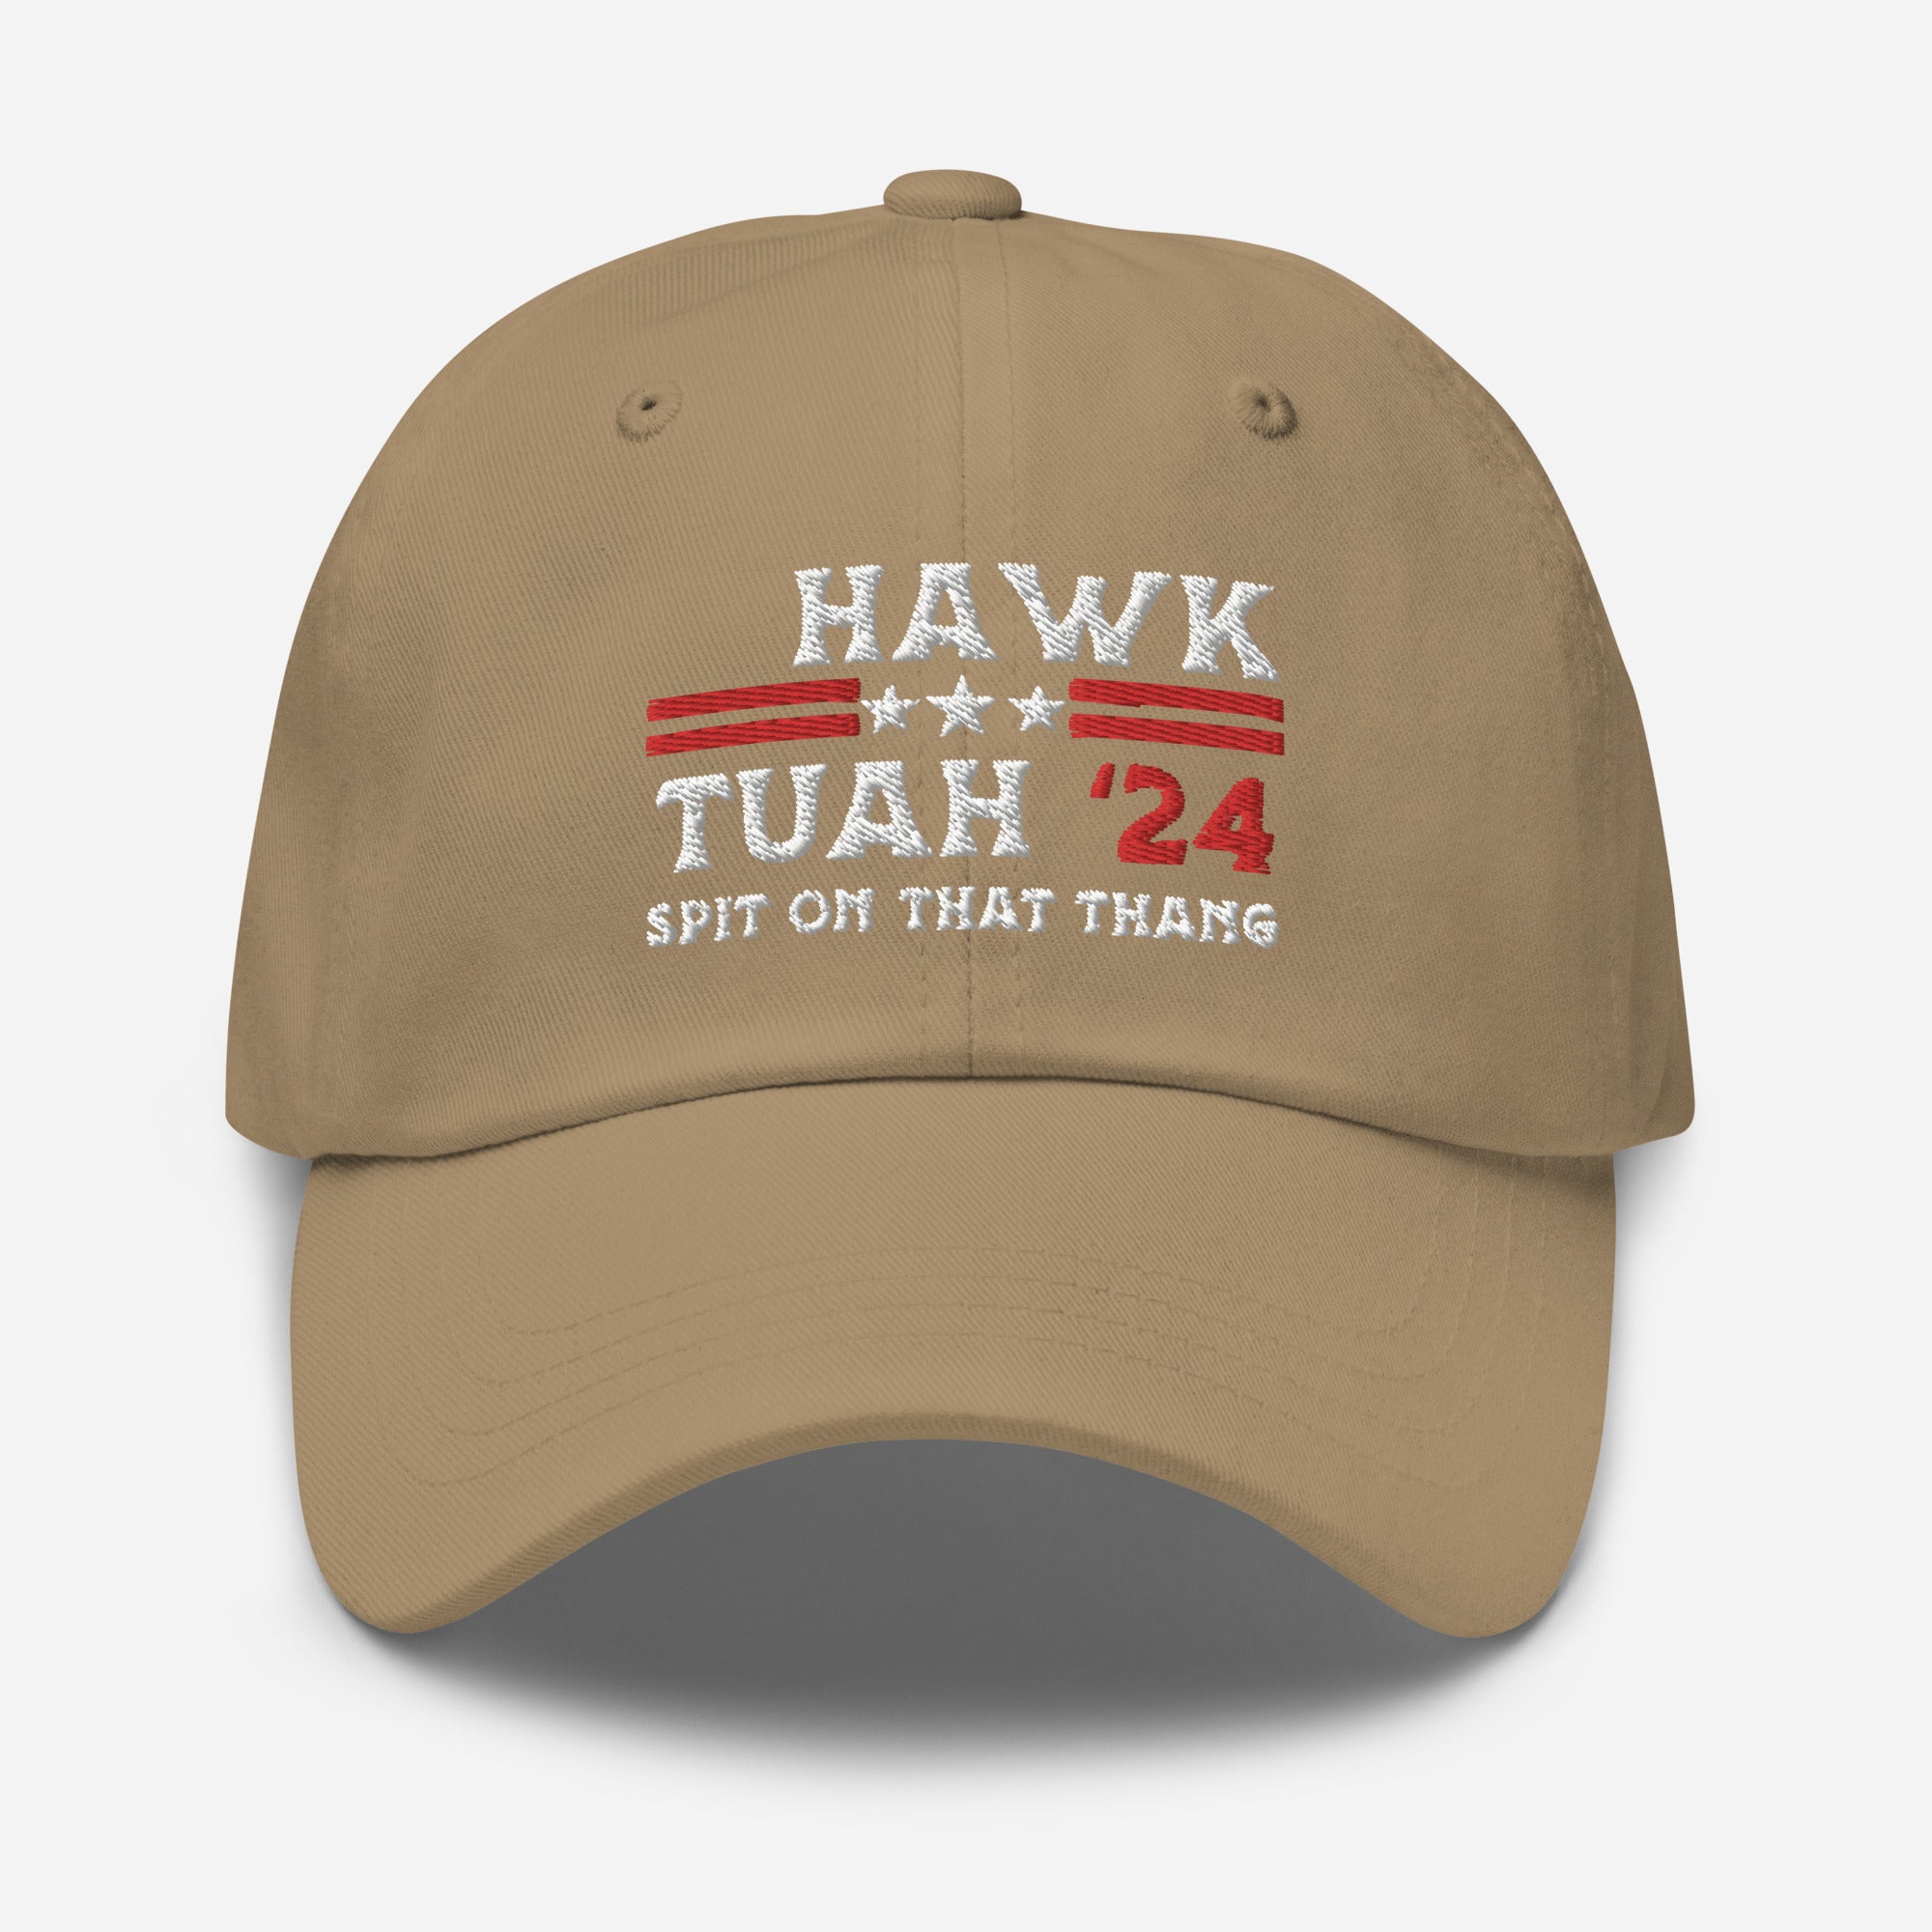 Hawk Tuah Hat, Spit On That Thang, Hawk Tuah 2024, Funny Adult Humor Hats, Viral Hat, Inappropriate Dad Hat, Popular Humor Gift Hats